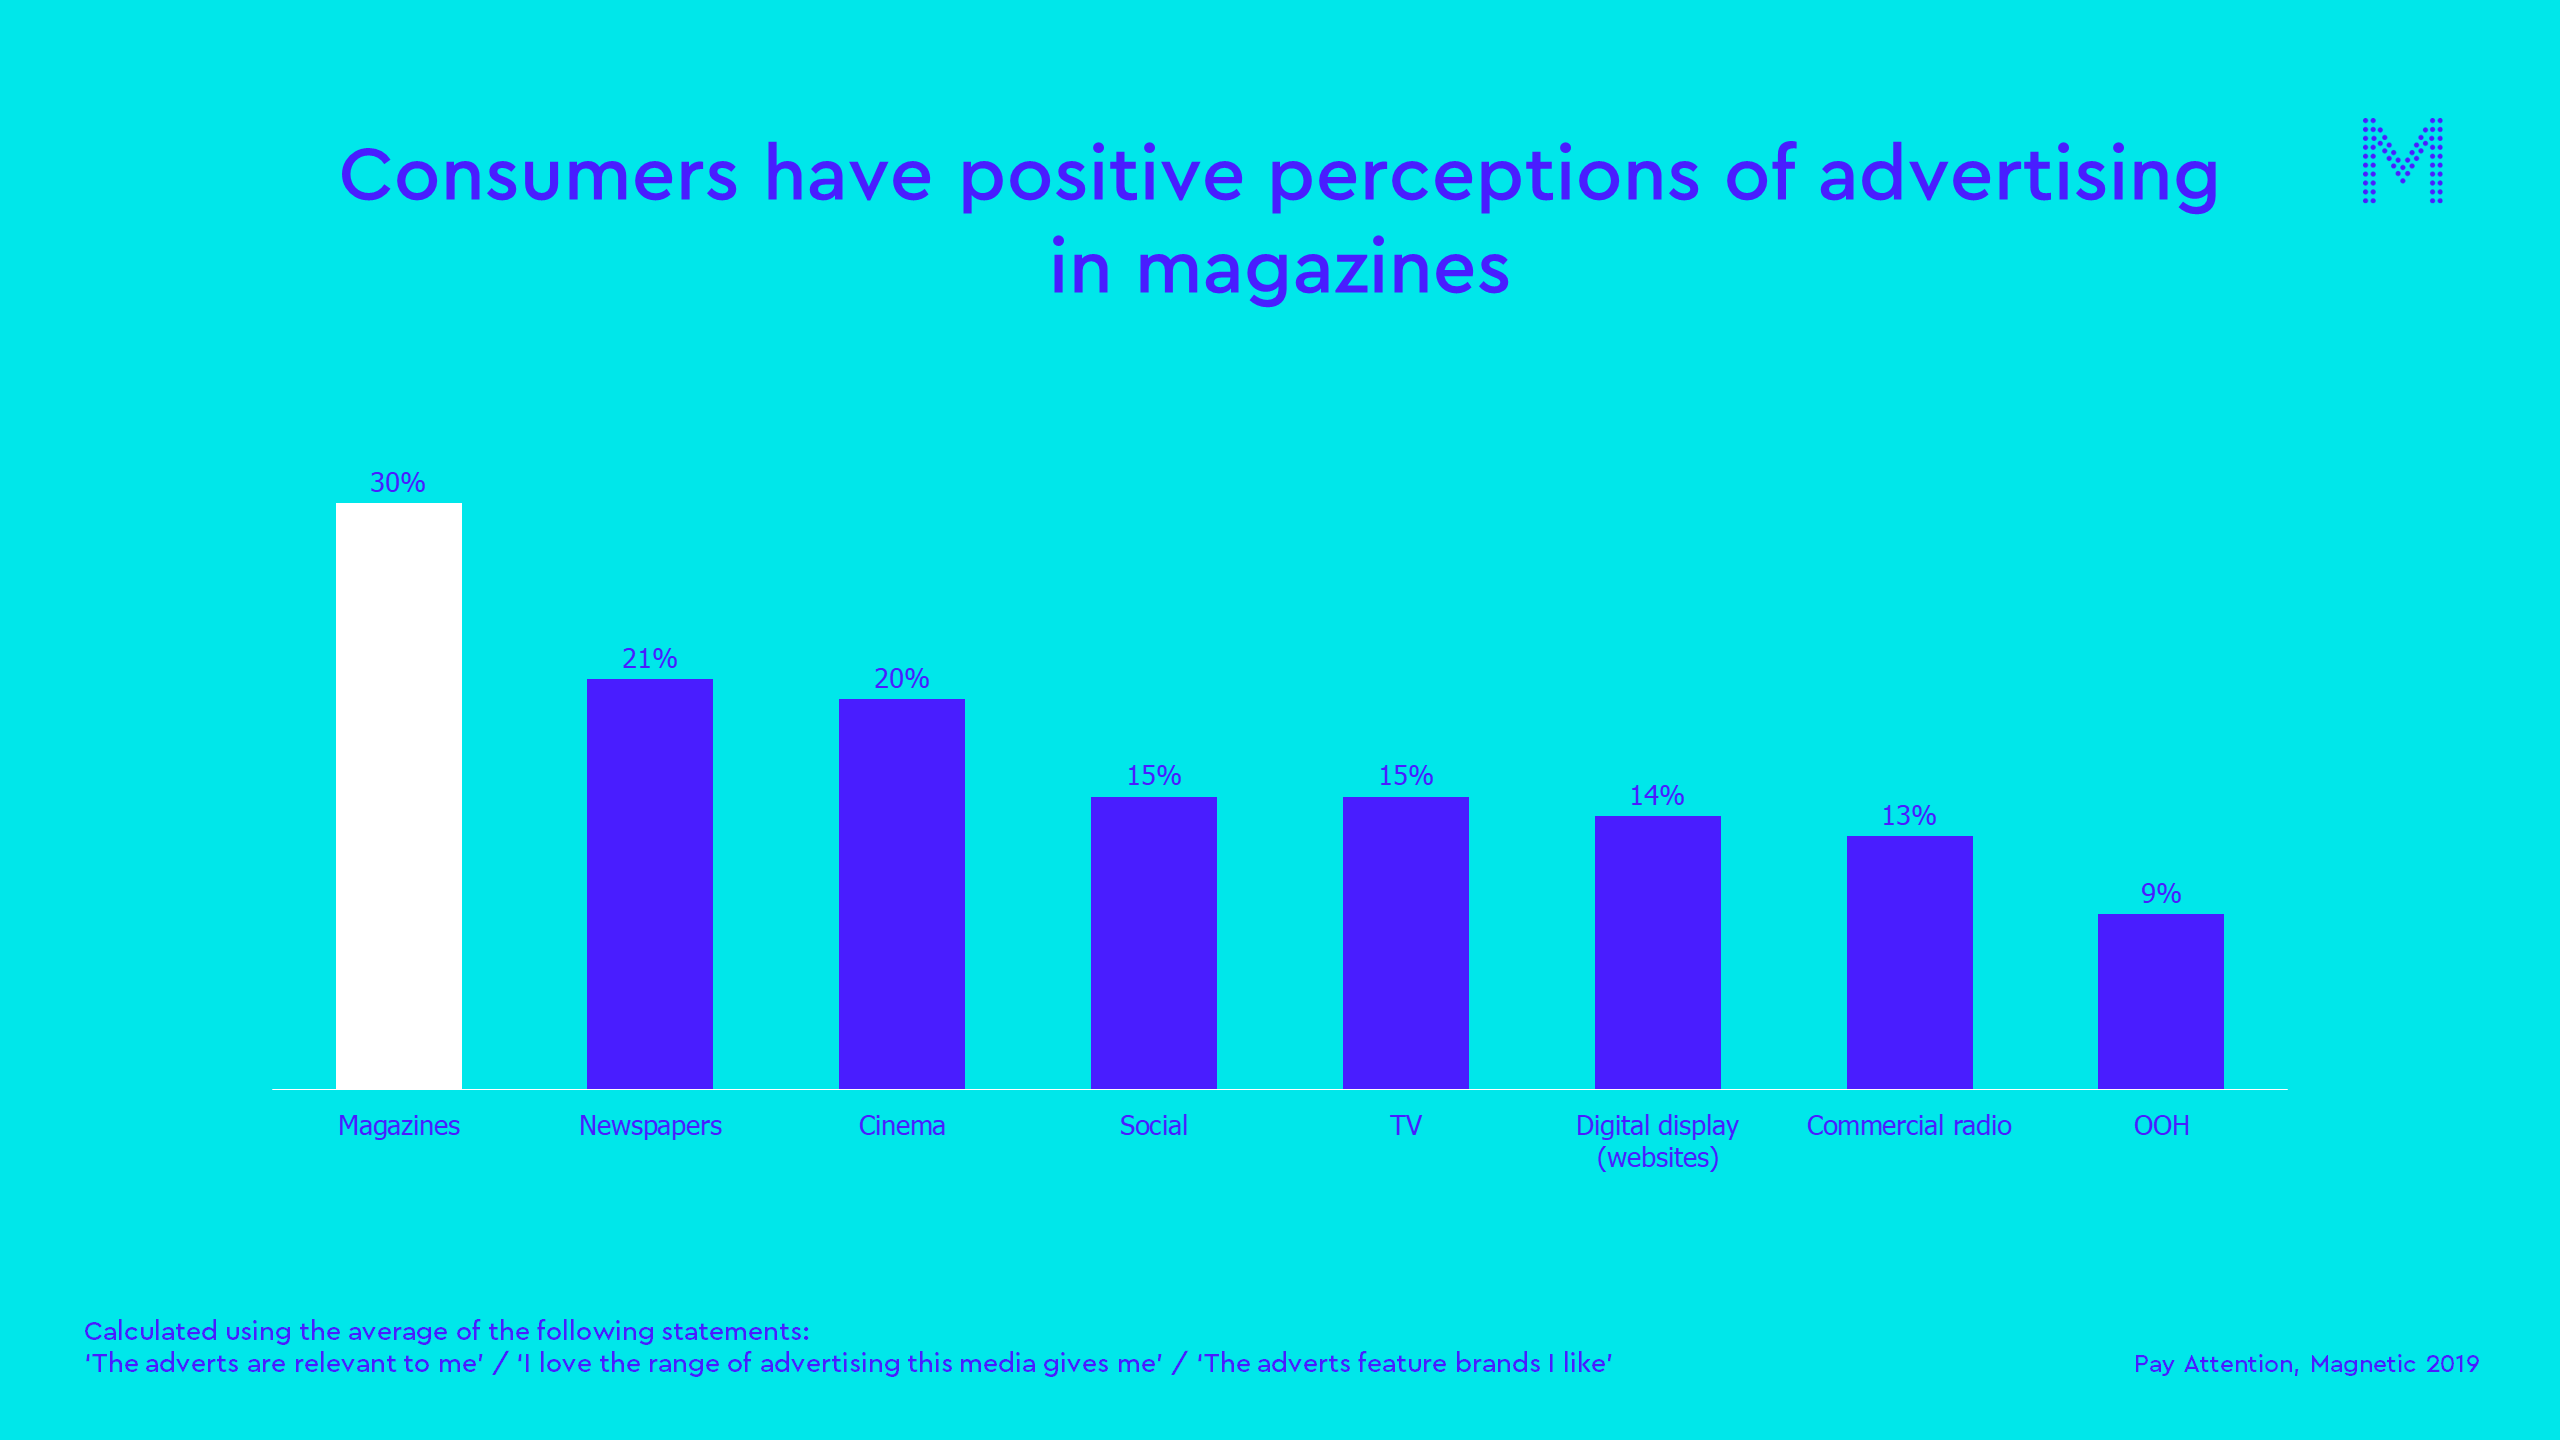 Consumers have positive perceptions of advertising in magazines